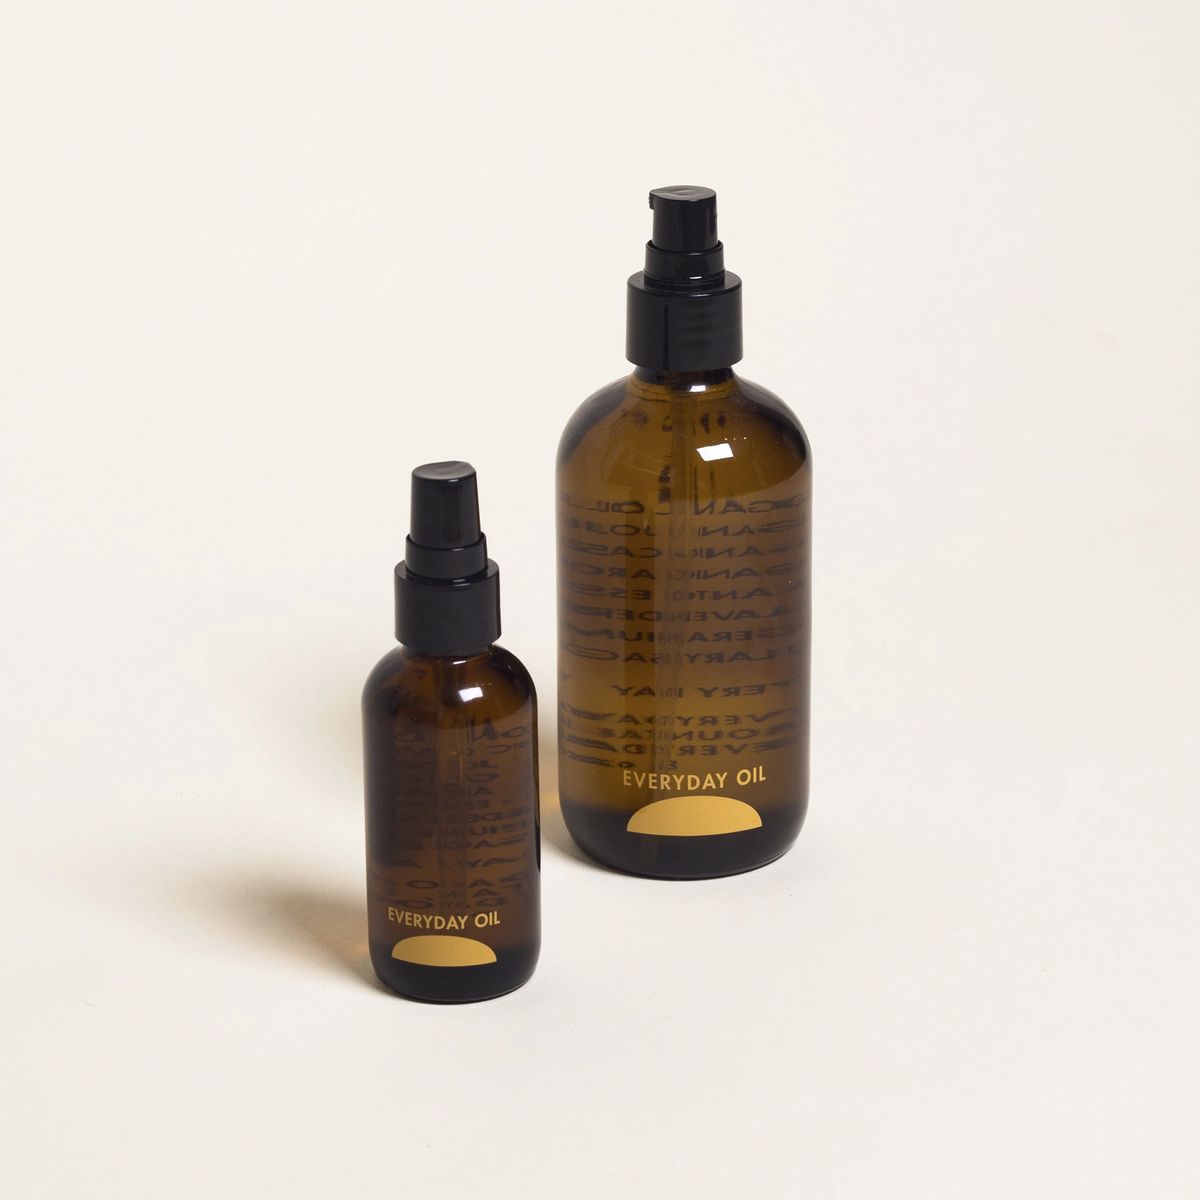 One small and one large bottle of Everyday Oil